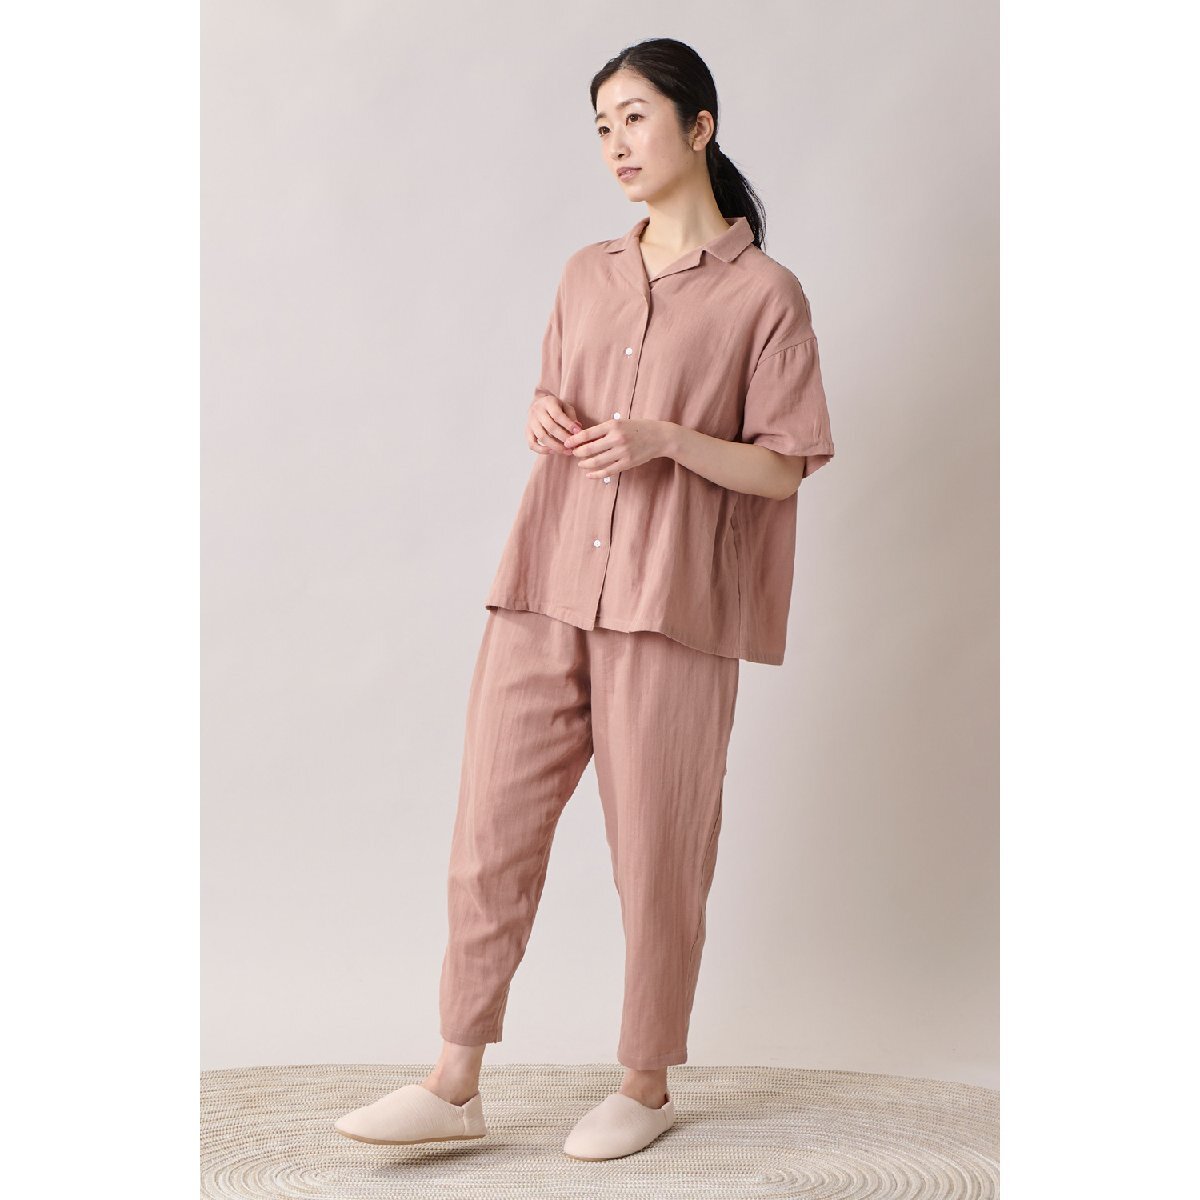 ma.. moisturizer cream as with ....... wrap up room wear short sleeves summer pyjamas . collar type button pink L size cotton 100%